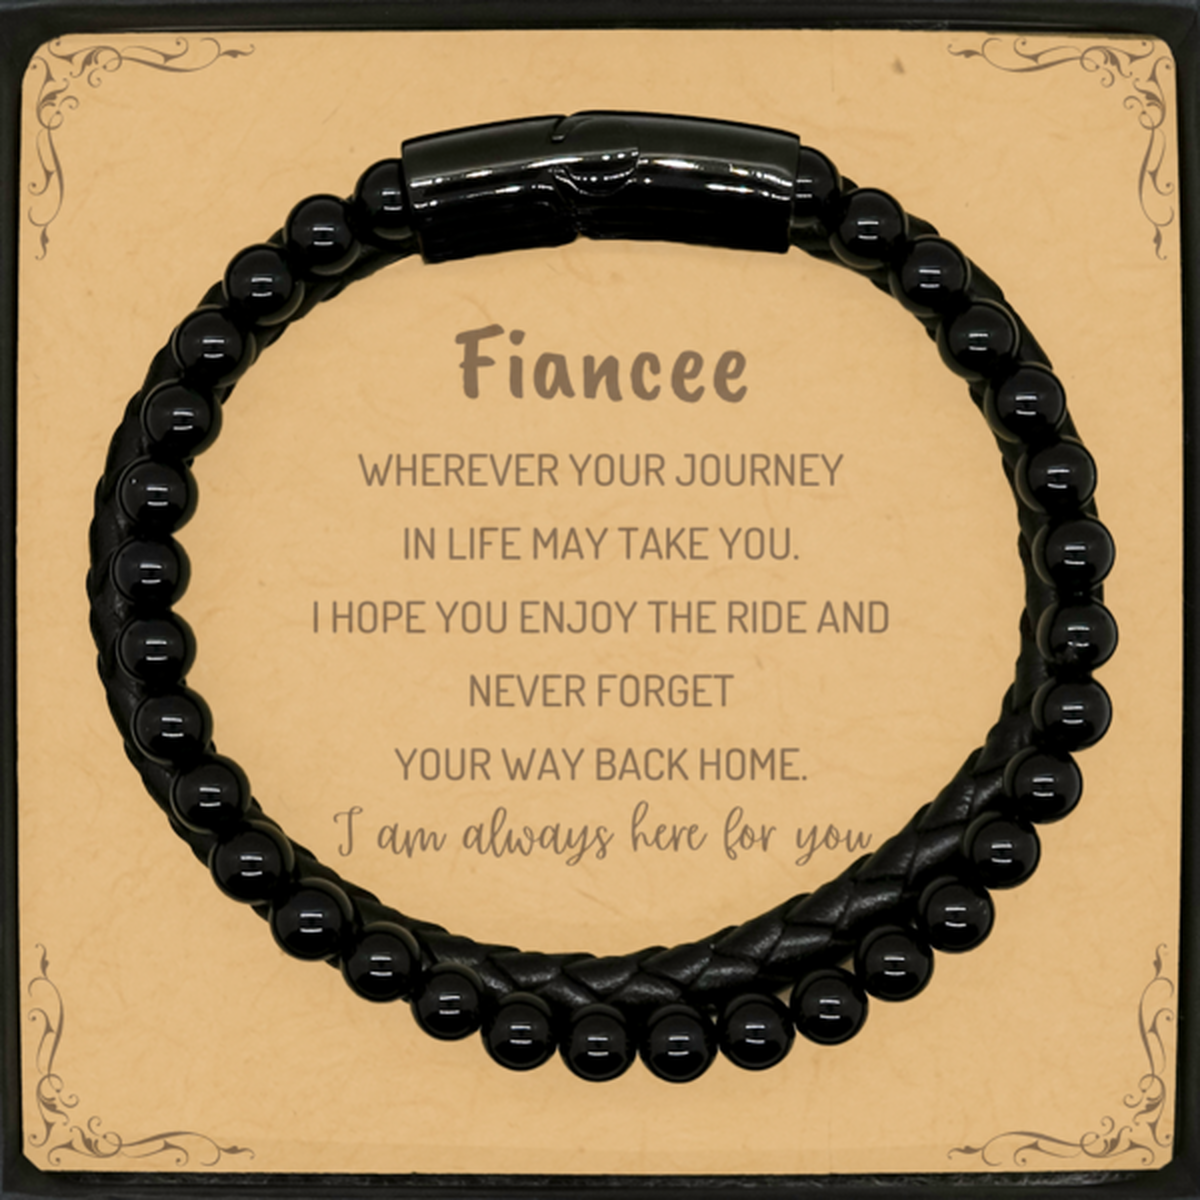 Fiancee wherever your journey in life may take you, I am always here for you Fiancee Stone Leather Bracelets, Awesome Christmas Gifts For Fiancee Message Card, Fiancee Birthday Gifts for Men Women Family Loved One